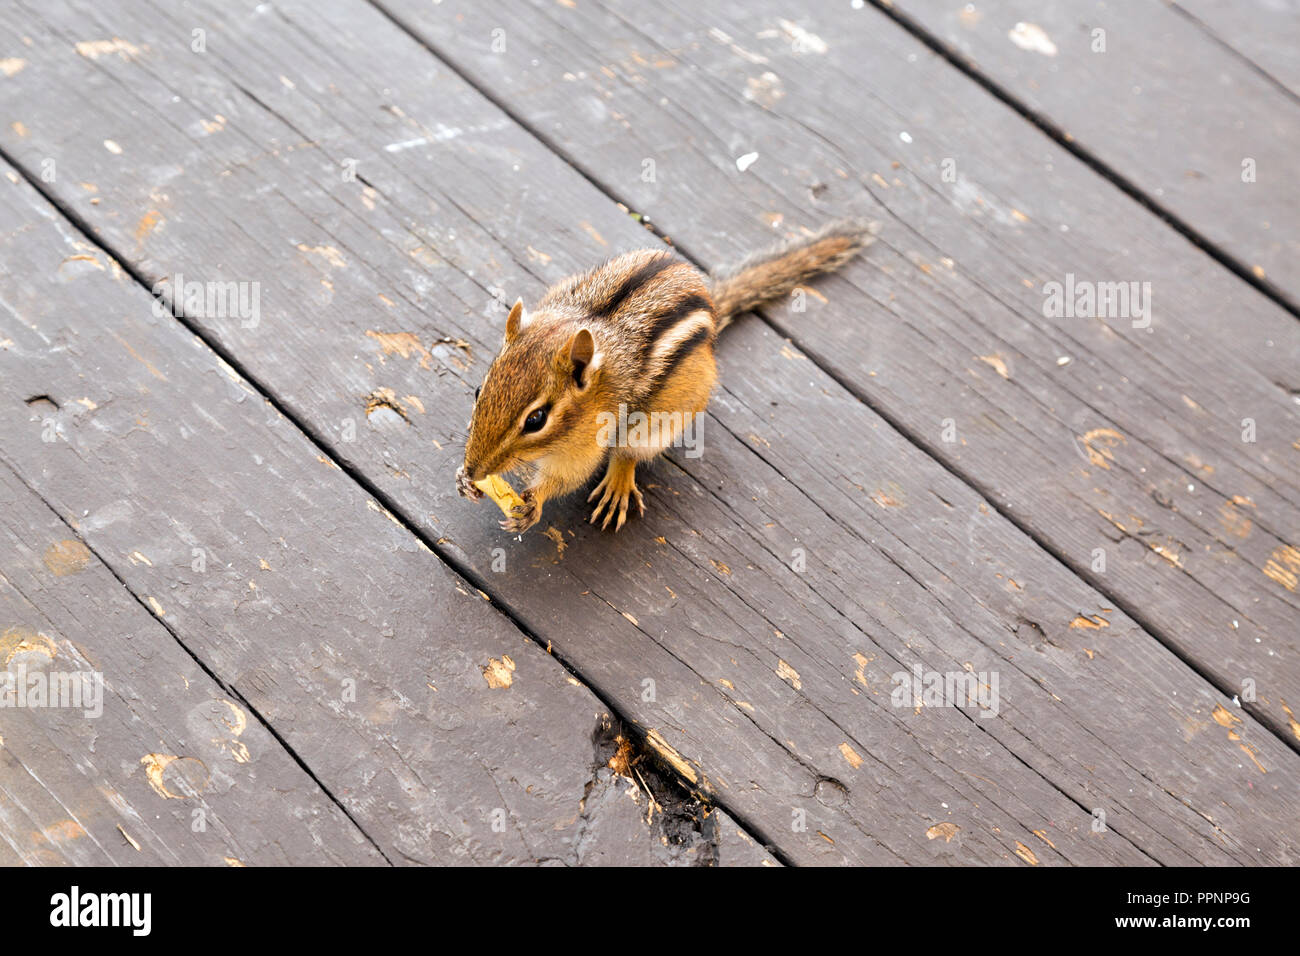 Least chipmunk eating a potato chip on a worn deck, located on Mackinac Island. Stock Photo